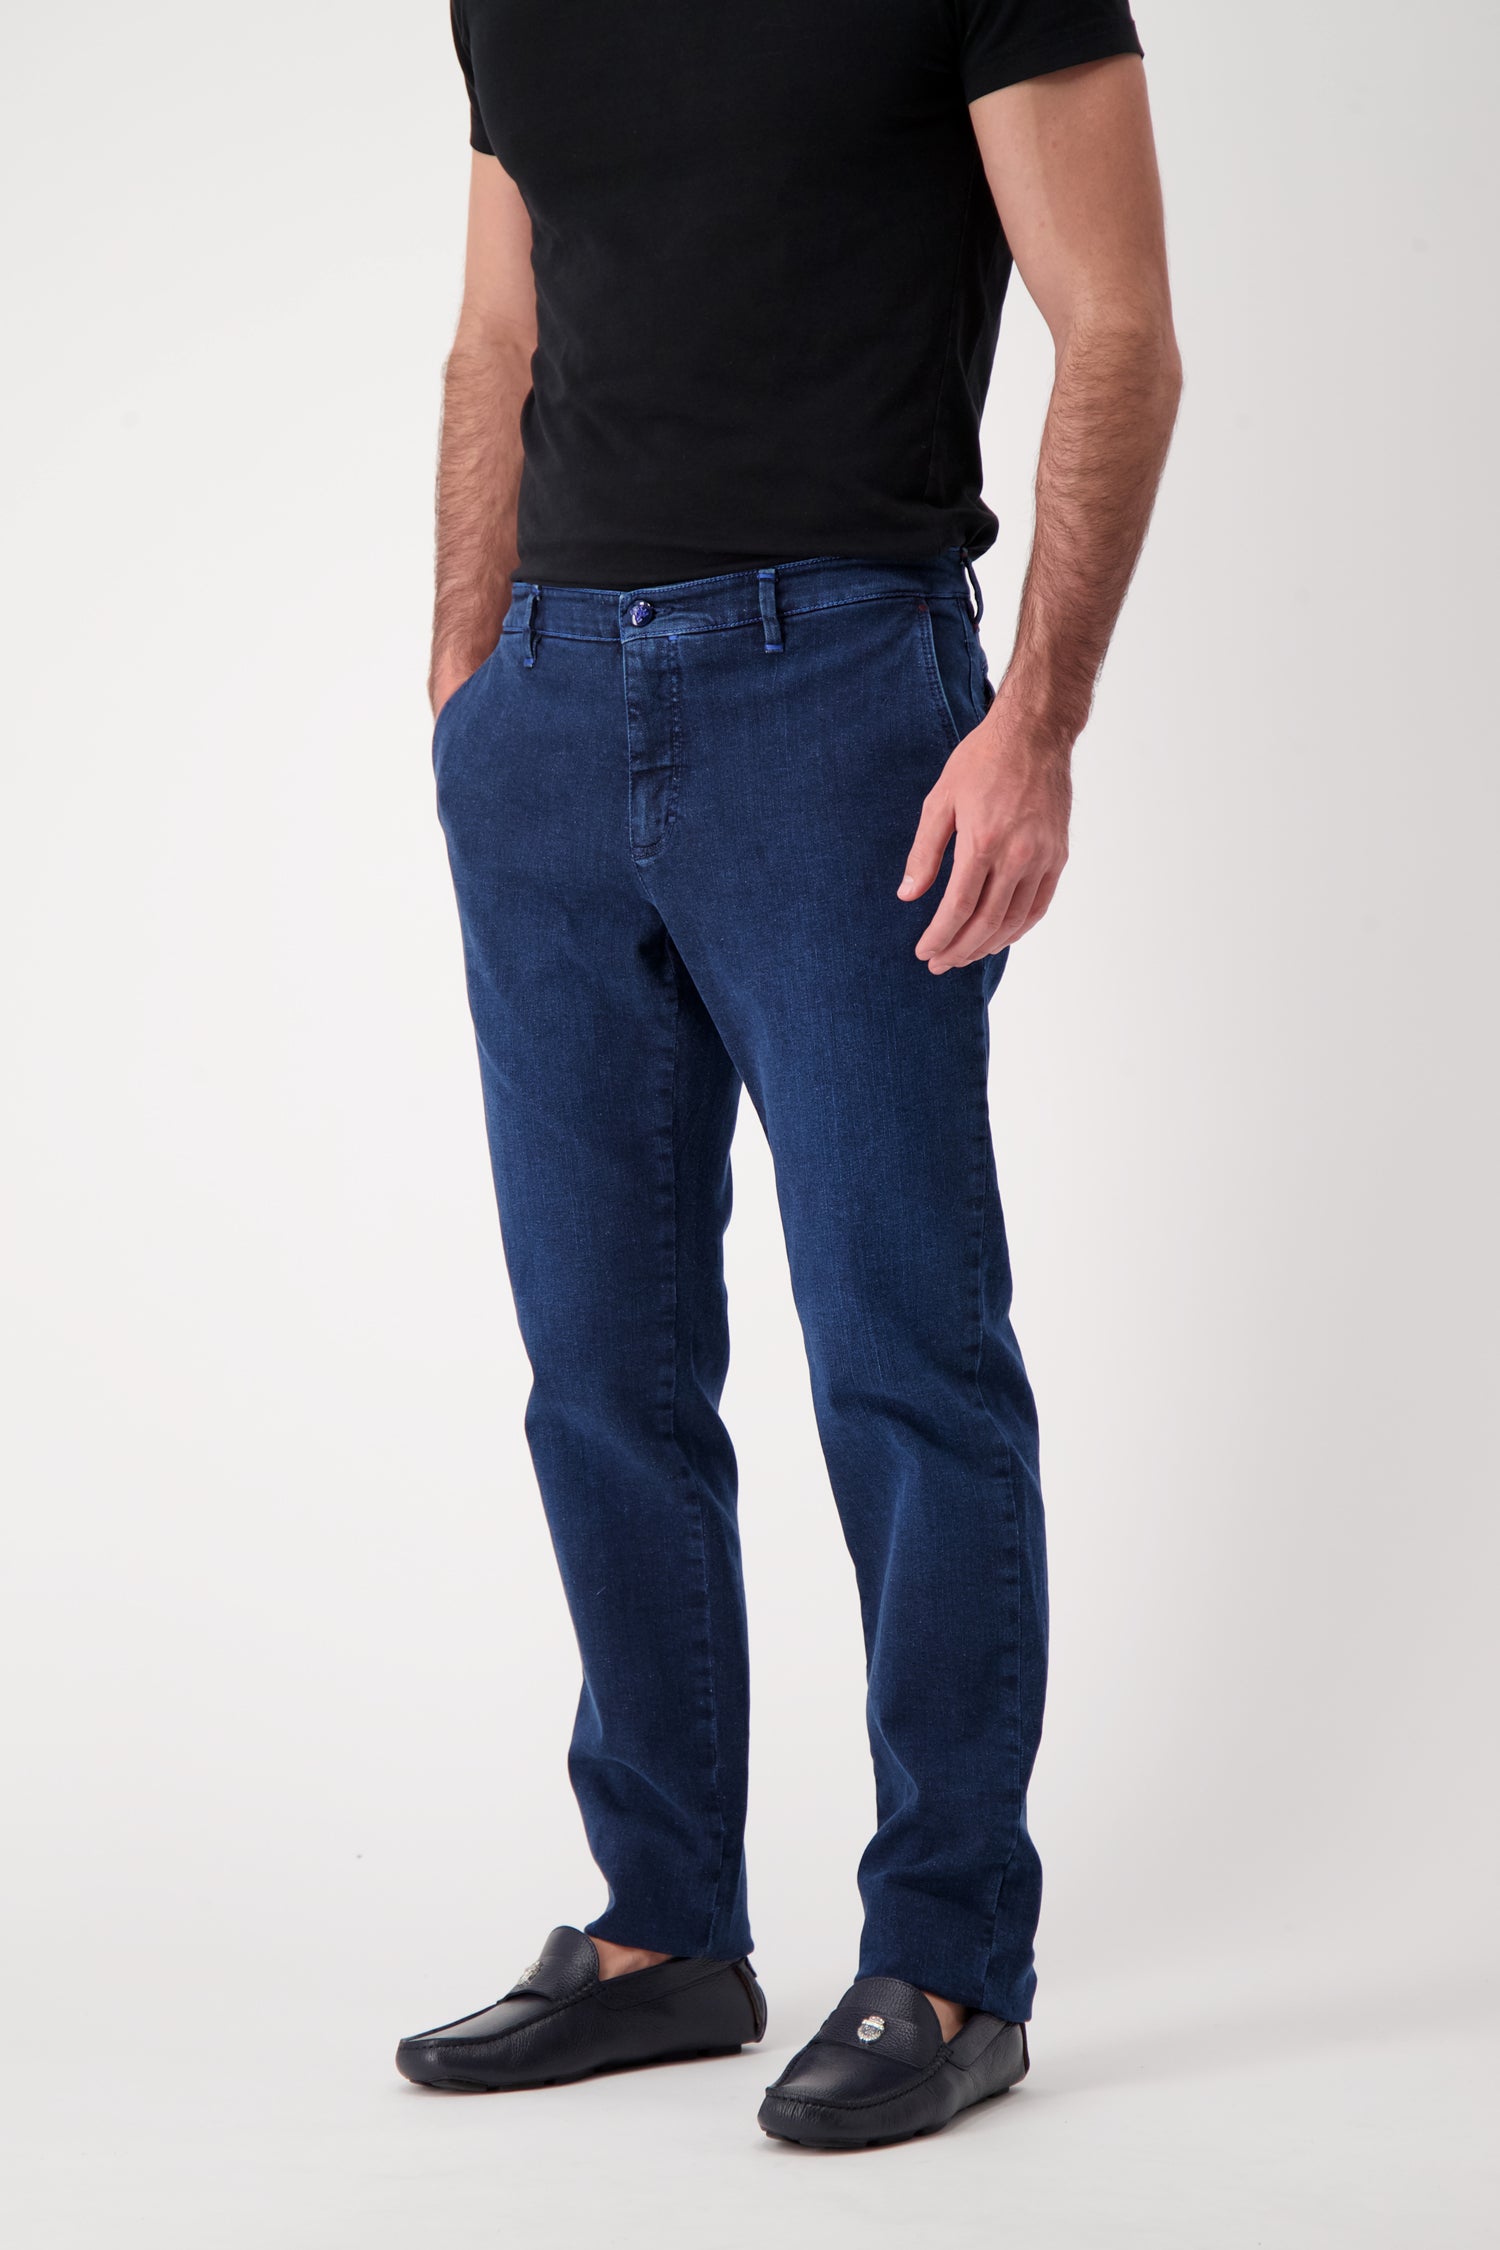 Shop Branded Luxury Men's Jeans From Top Designers